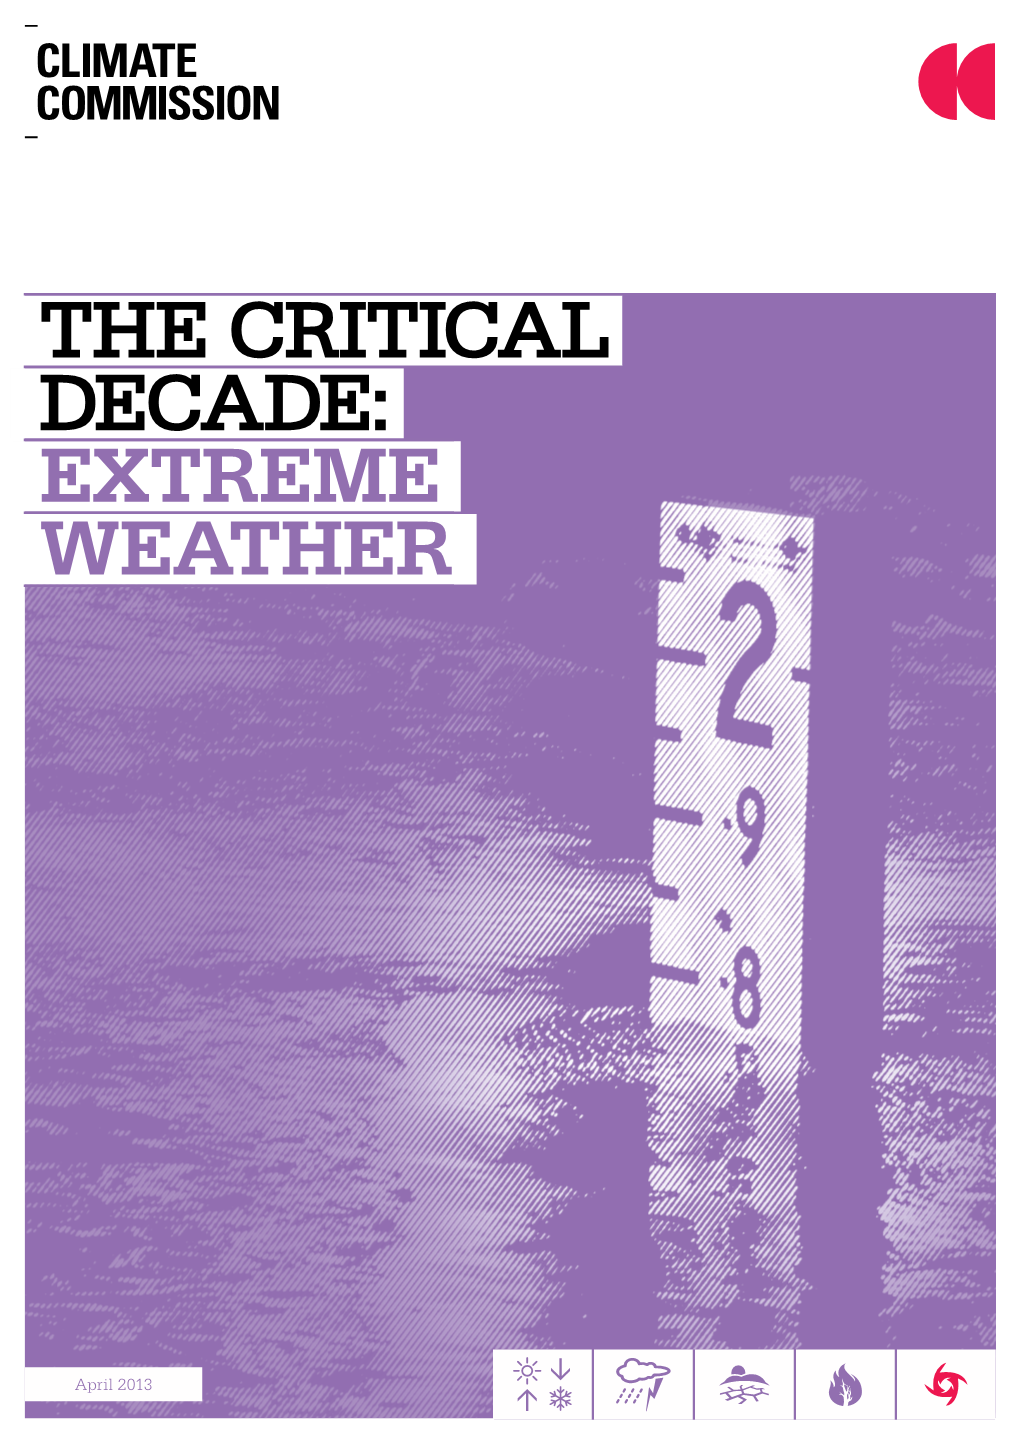 Extreme Weather EXTREME WEATHER Written by Professor Will Steffen, Professor Lesley Hughes and Professor David Karoly